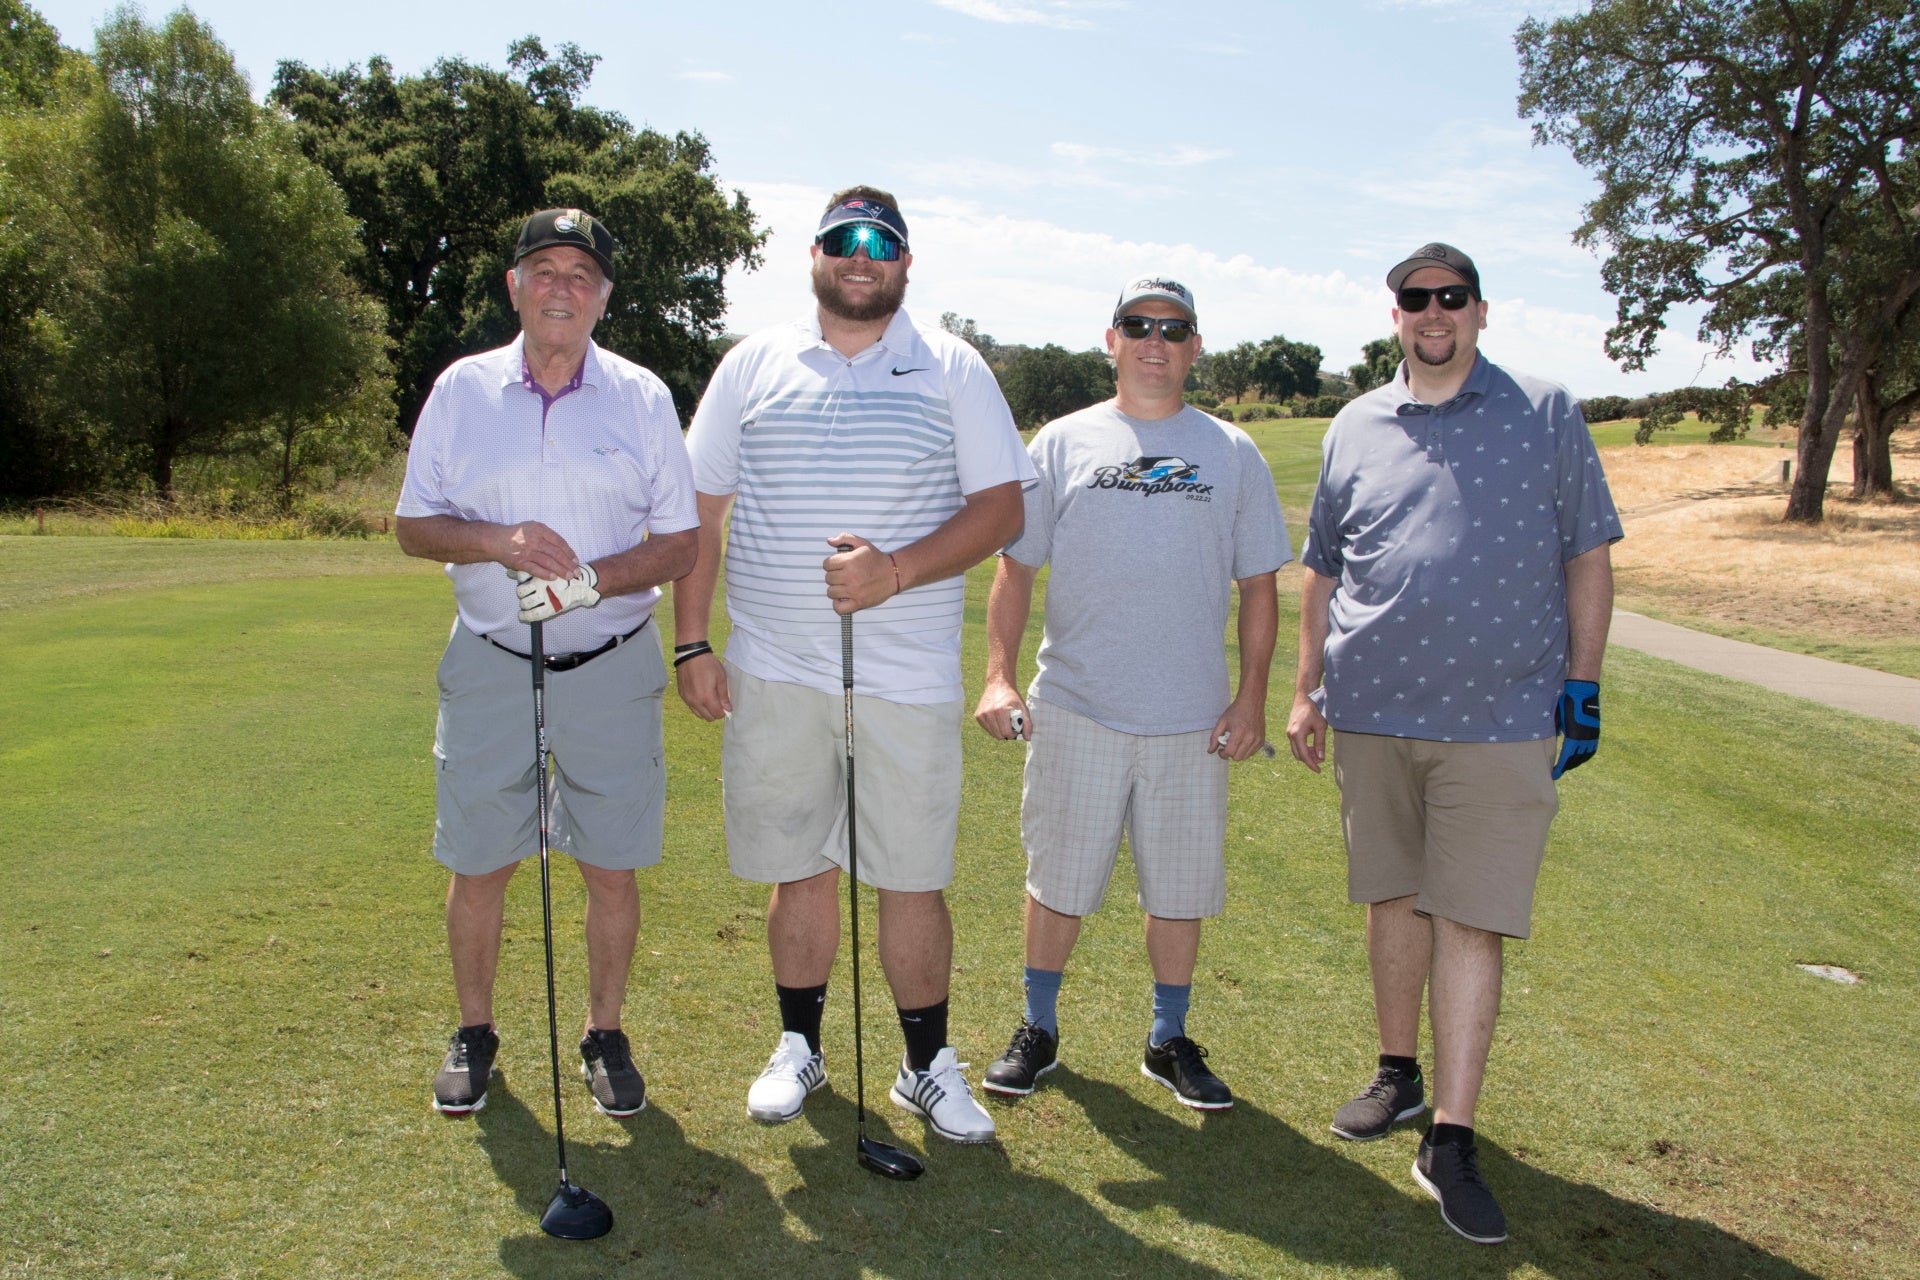 Golfers at the Shriners Children's Golf Classic 2023